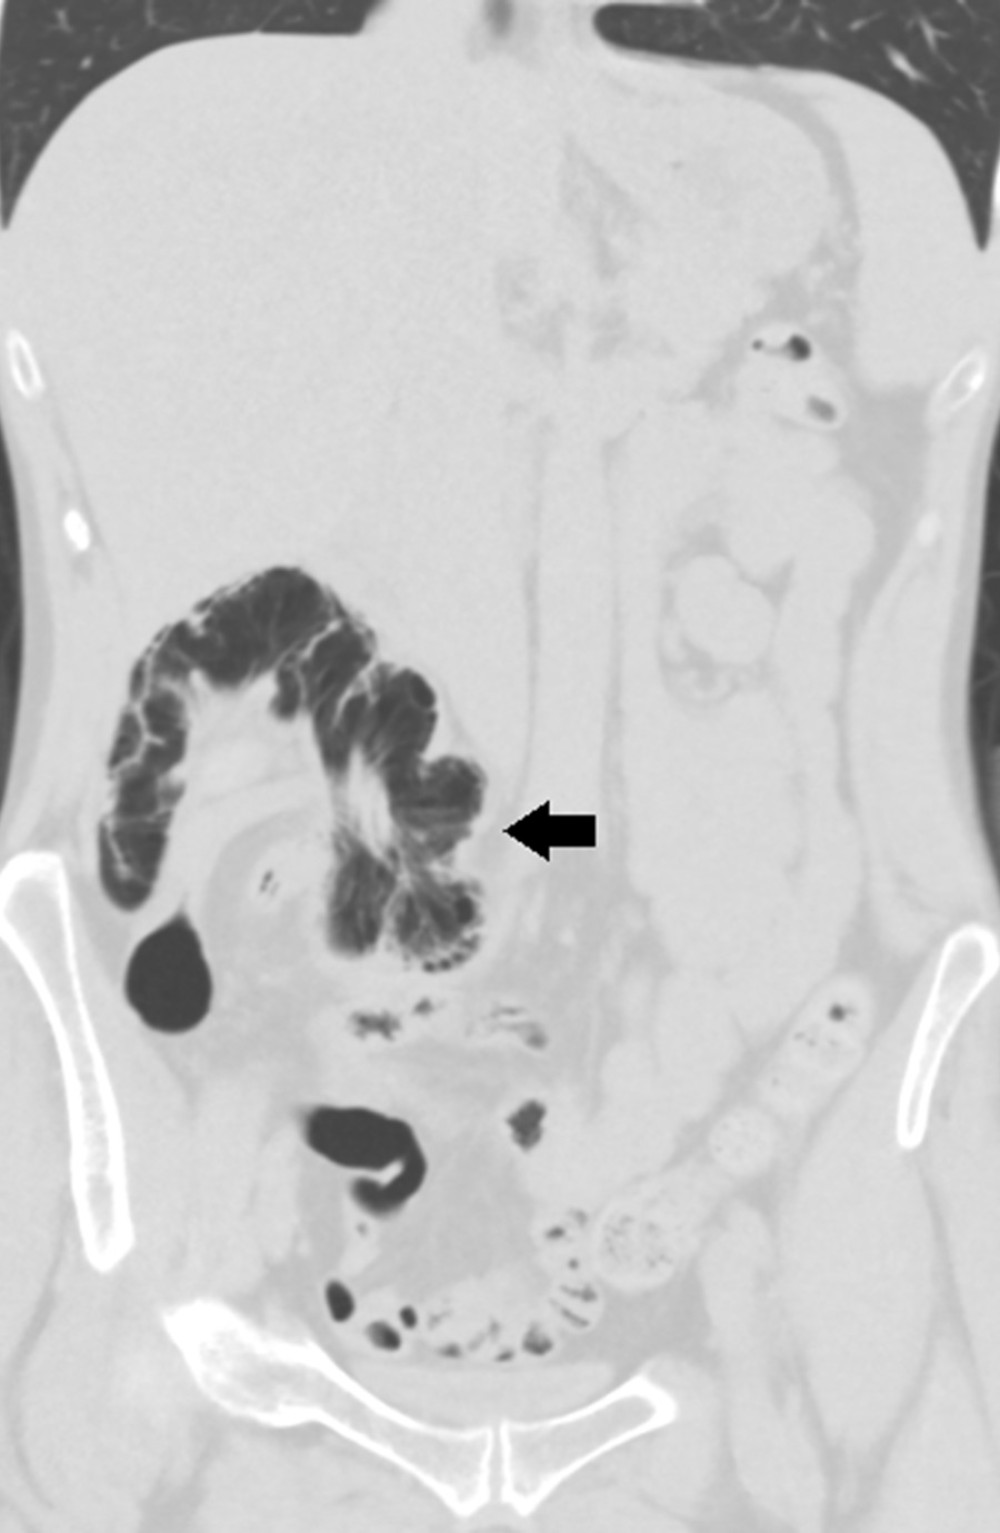 Axial image of abdominal CT scan in lung window demonstrating air in the bowel wall loculated around an intussuscept-like swirl of bowel loops (black arrow).